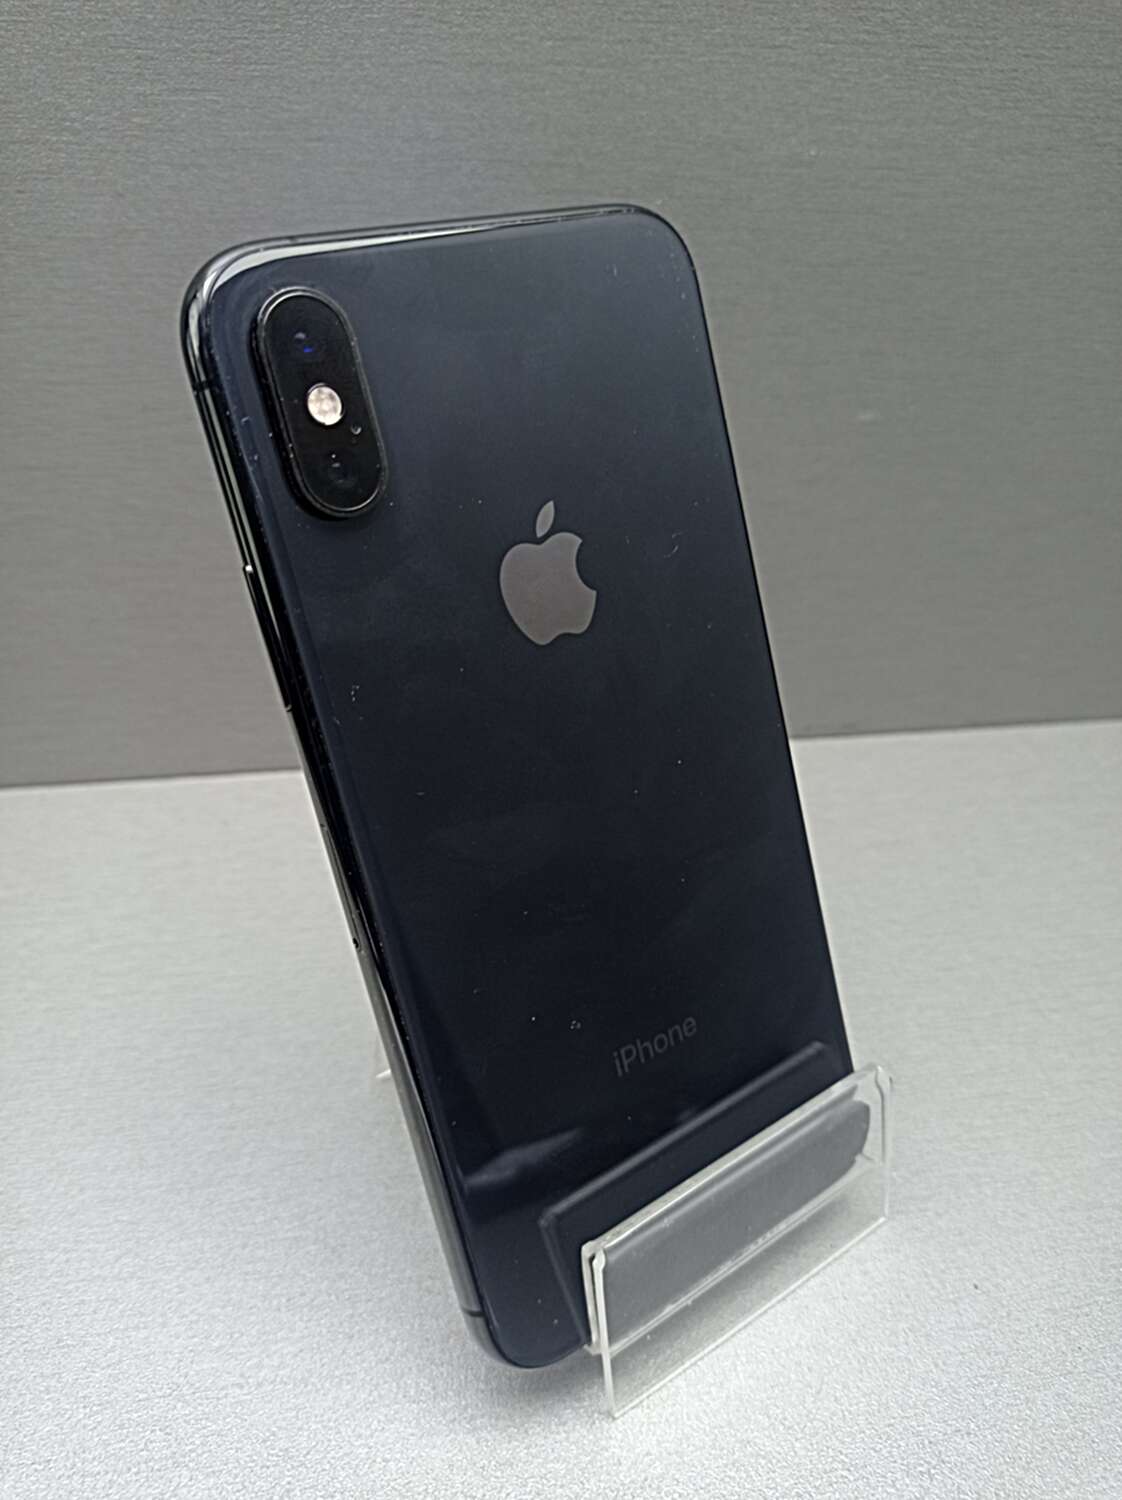 Apple iPhone XS 256Gb Space Gray (MT9H2) 3